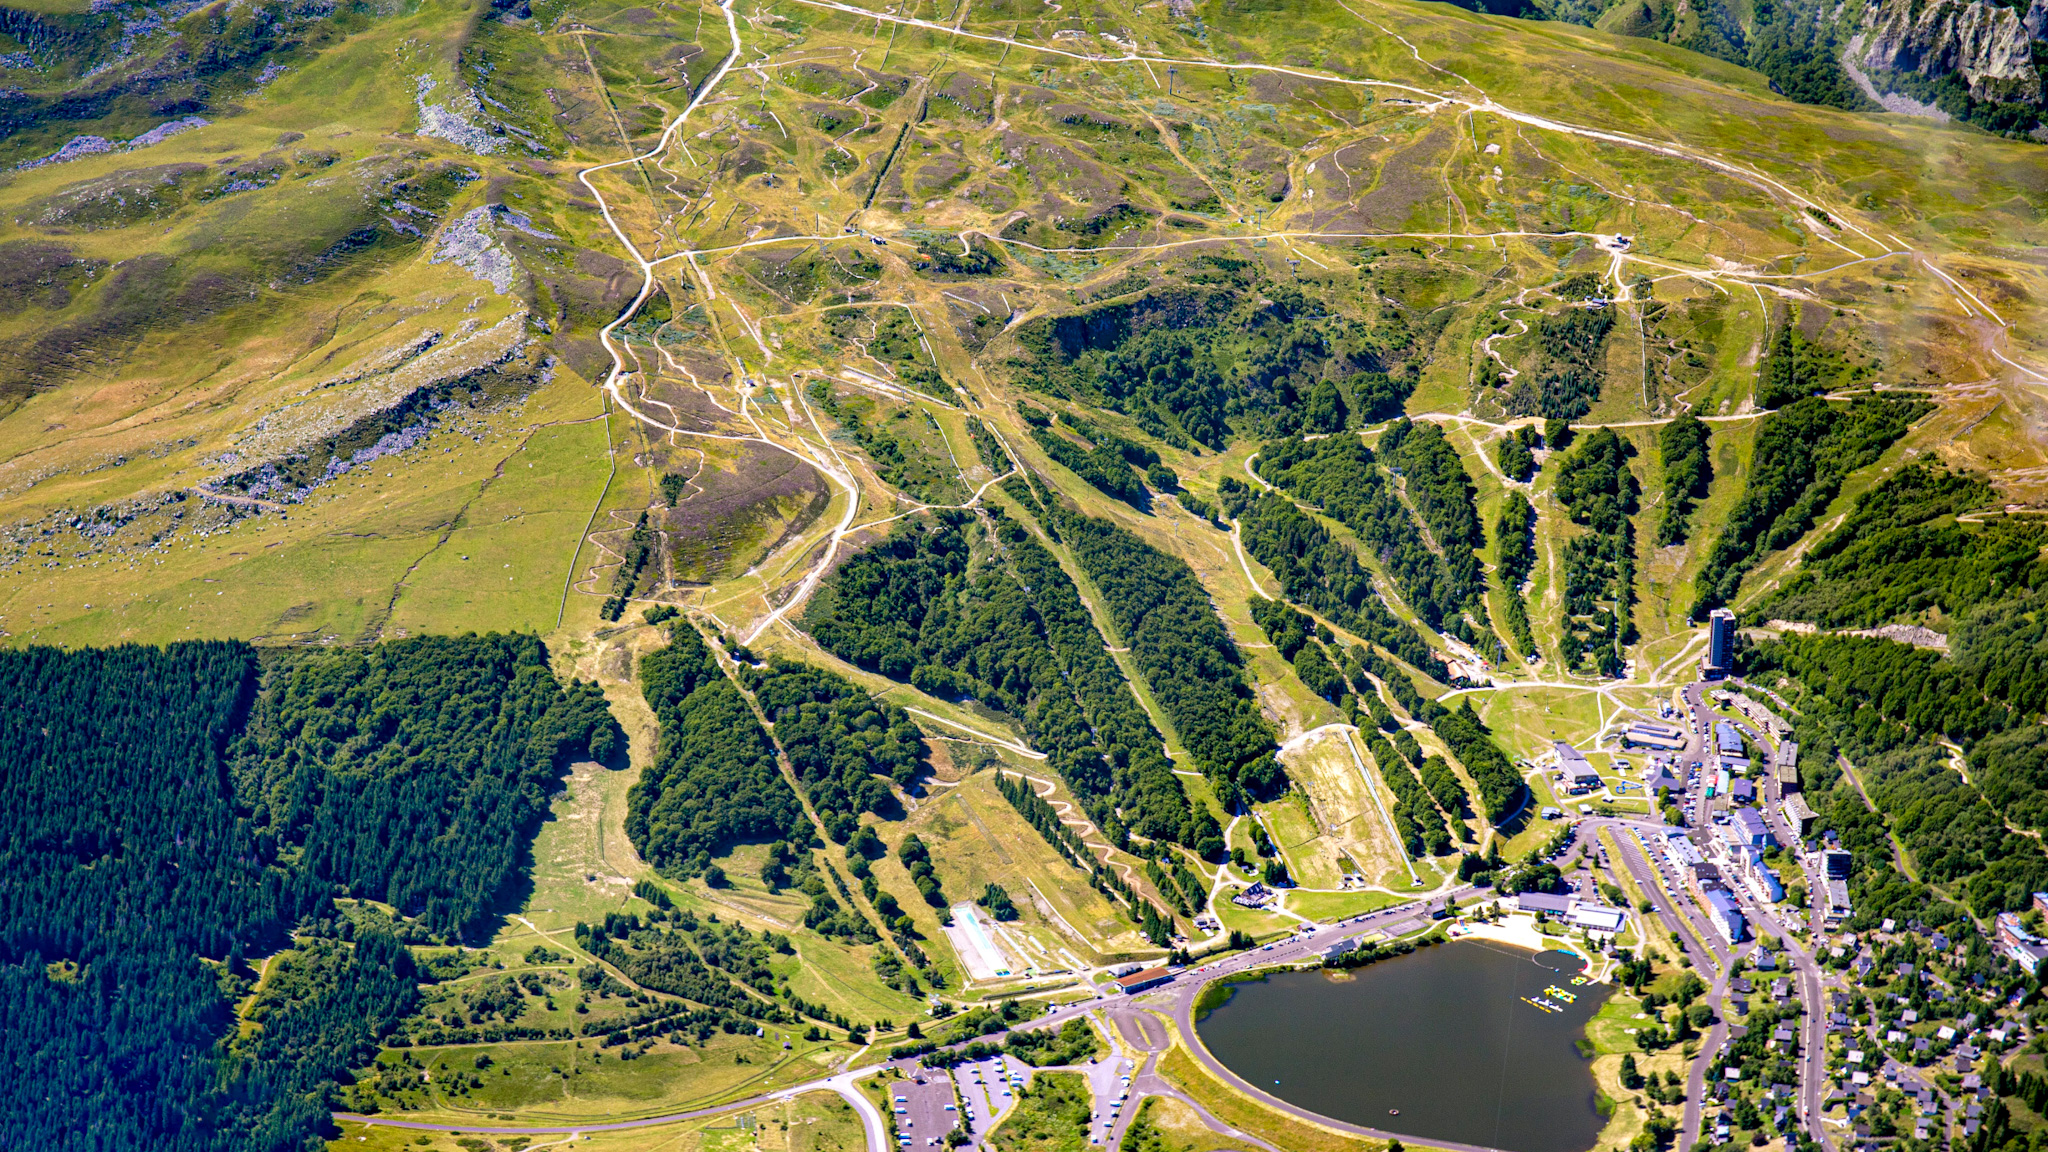 The ski resort of Super Besse, Lac des Hermines and the hiking trails to Puy de Sancy